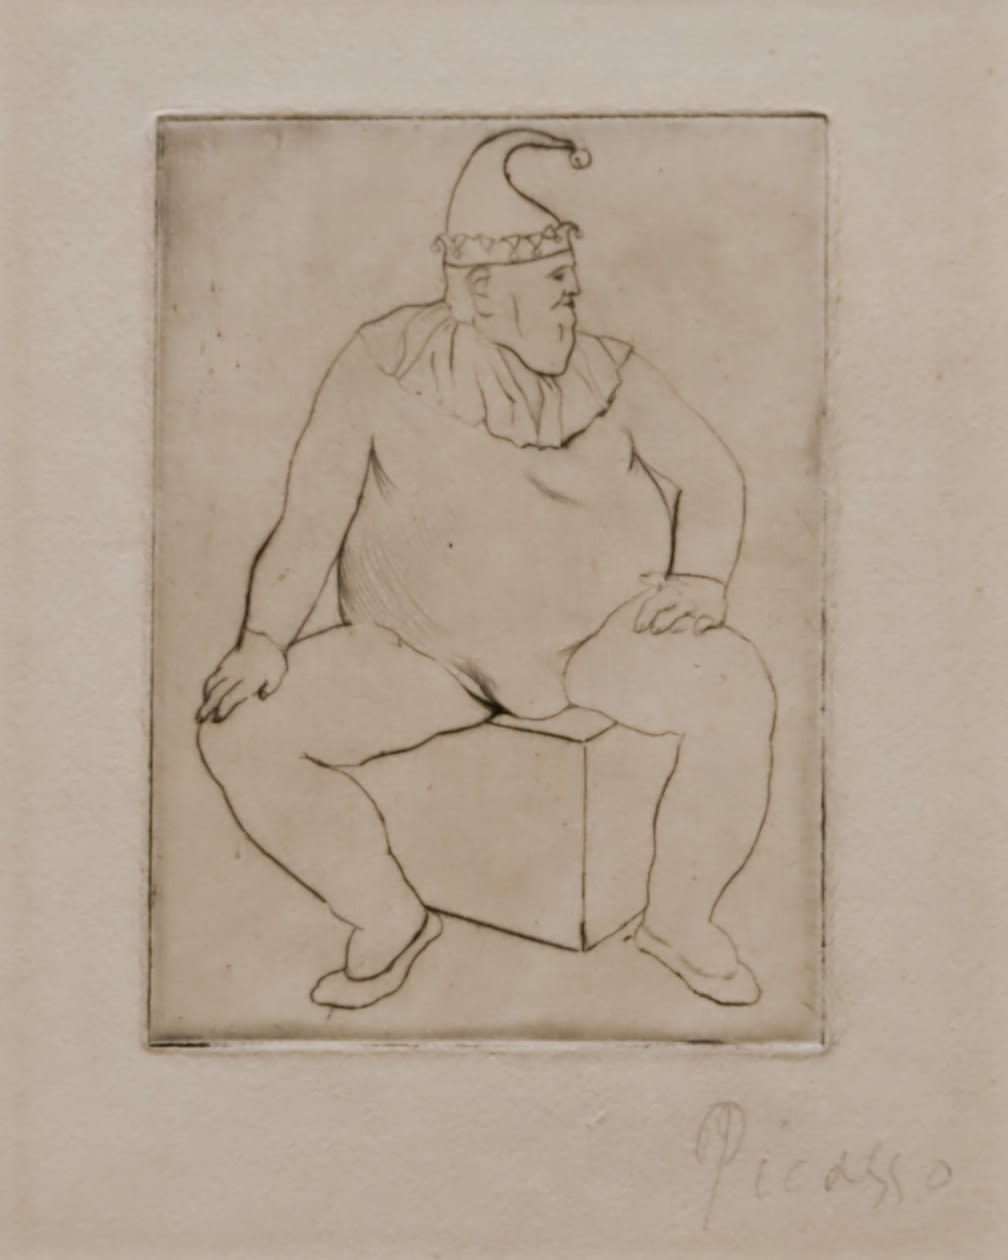 Le Saltimbanque au Repos (Bloch 10), 1905, drypoint, 4 3/4 x 3 7/16 inches